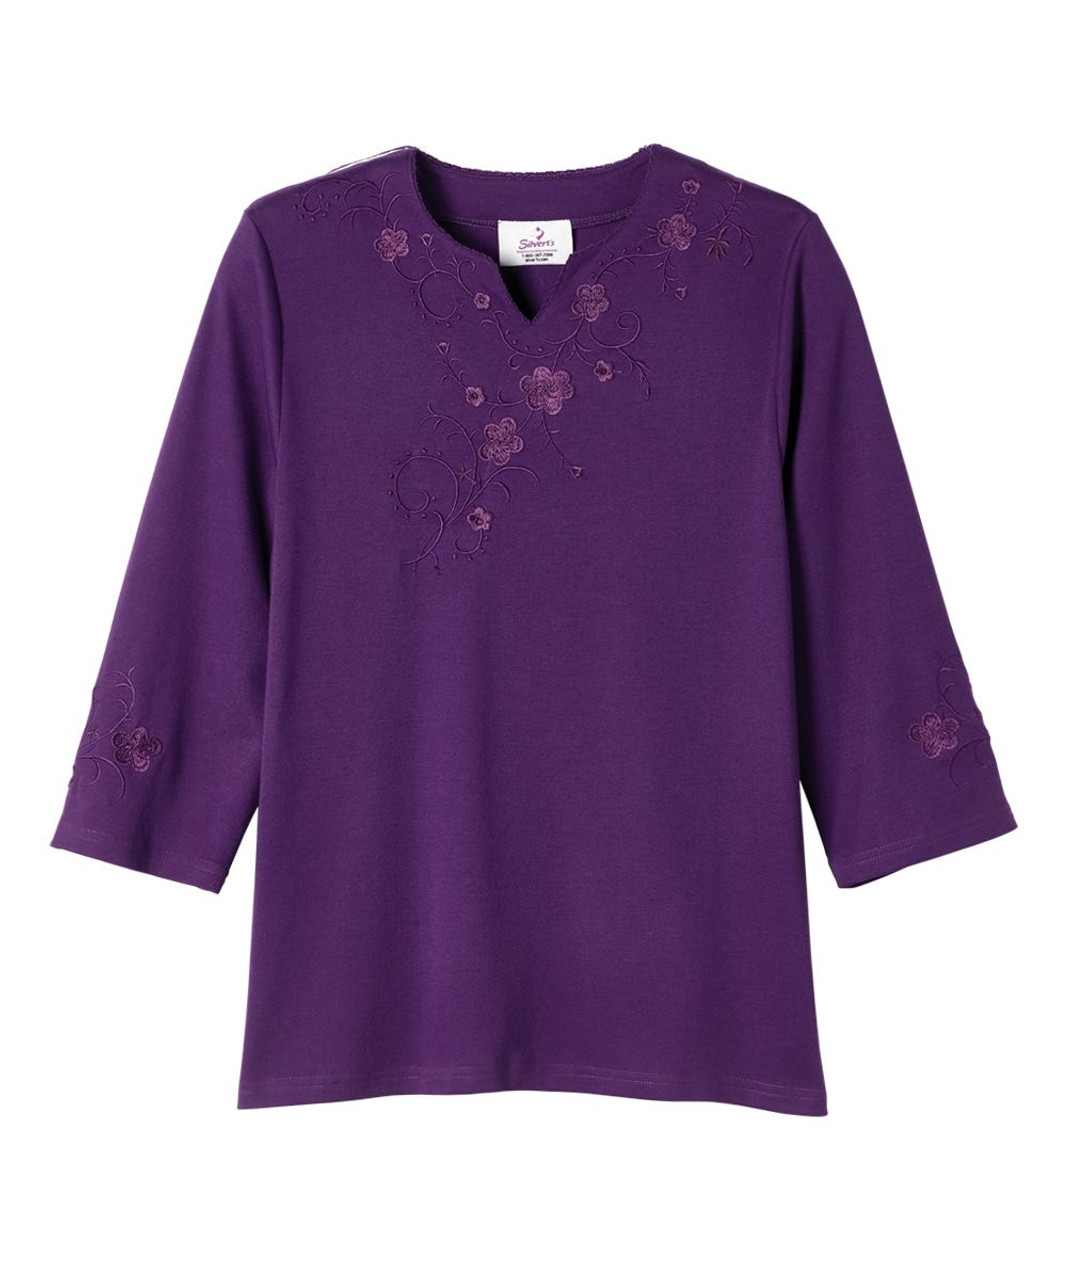 Silverts SV22530 Pretty Embroidered Adaptive Top For Women - Open Back Scalloped Neck Top For Women Eggplant, Size=M, SV22530-SV37-M